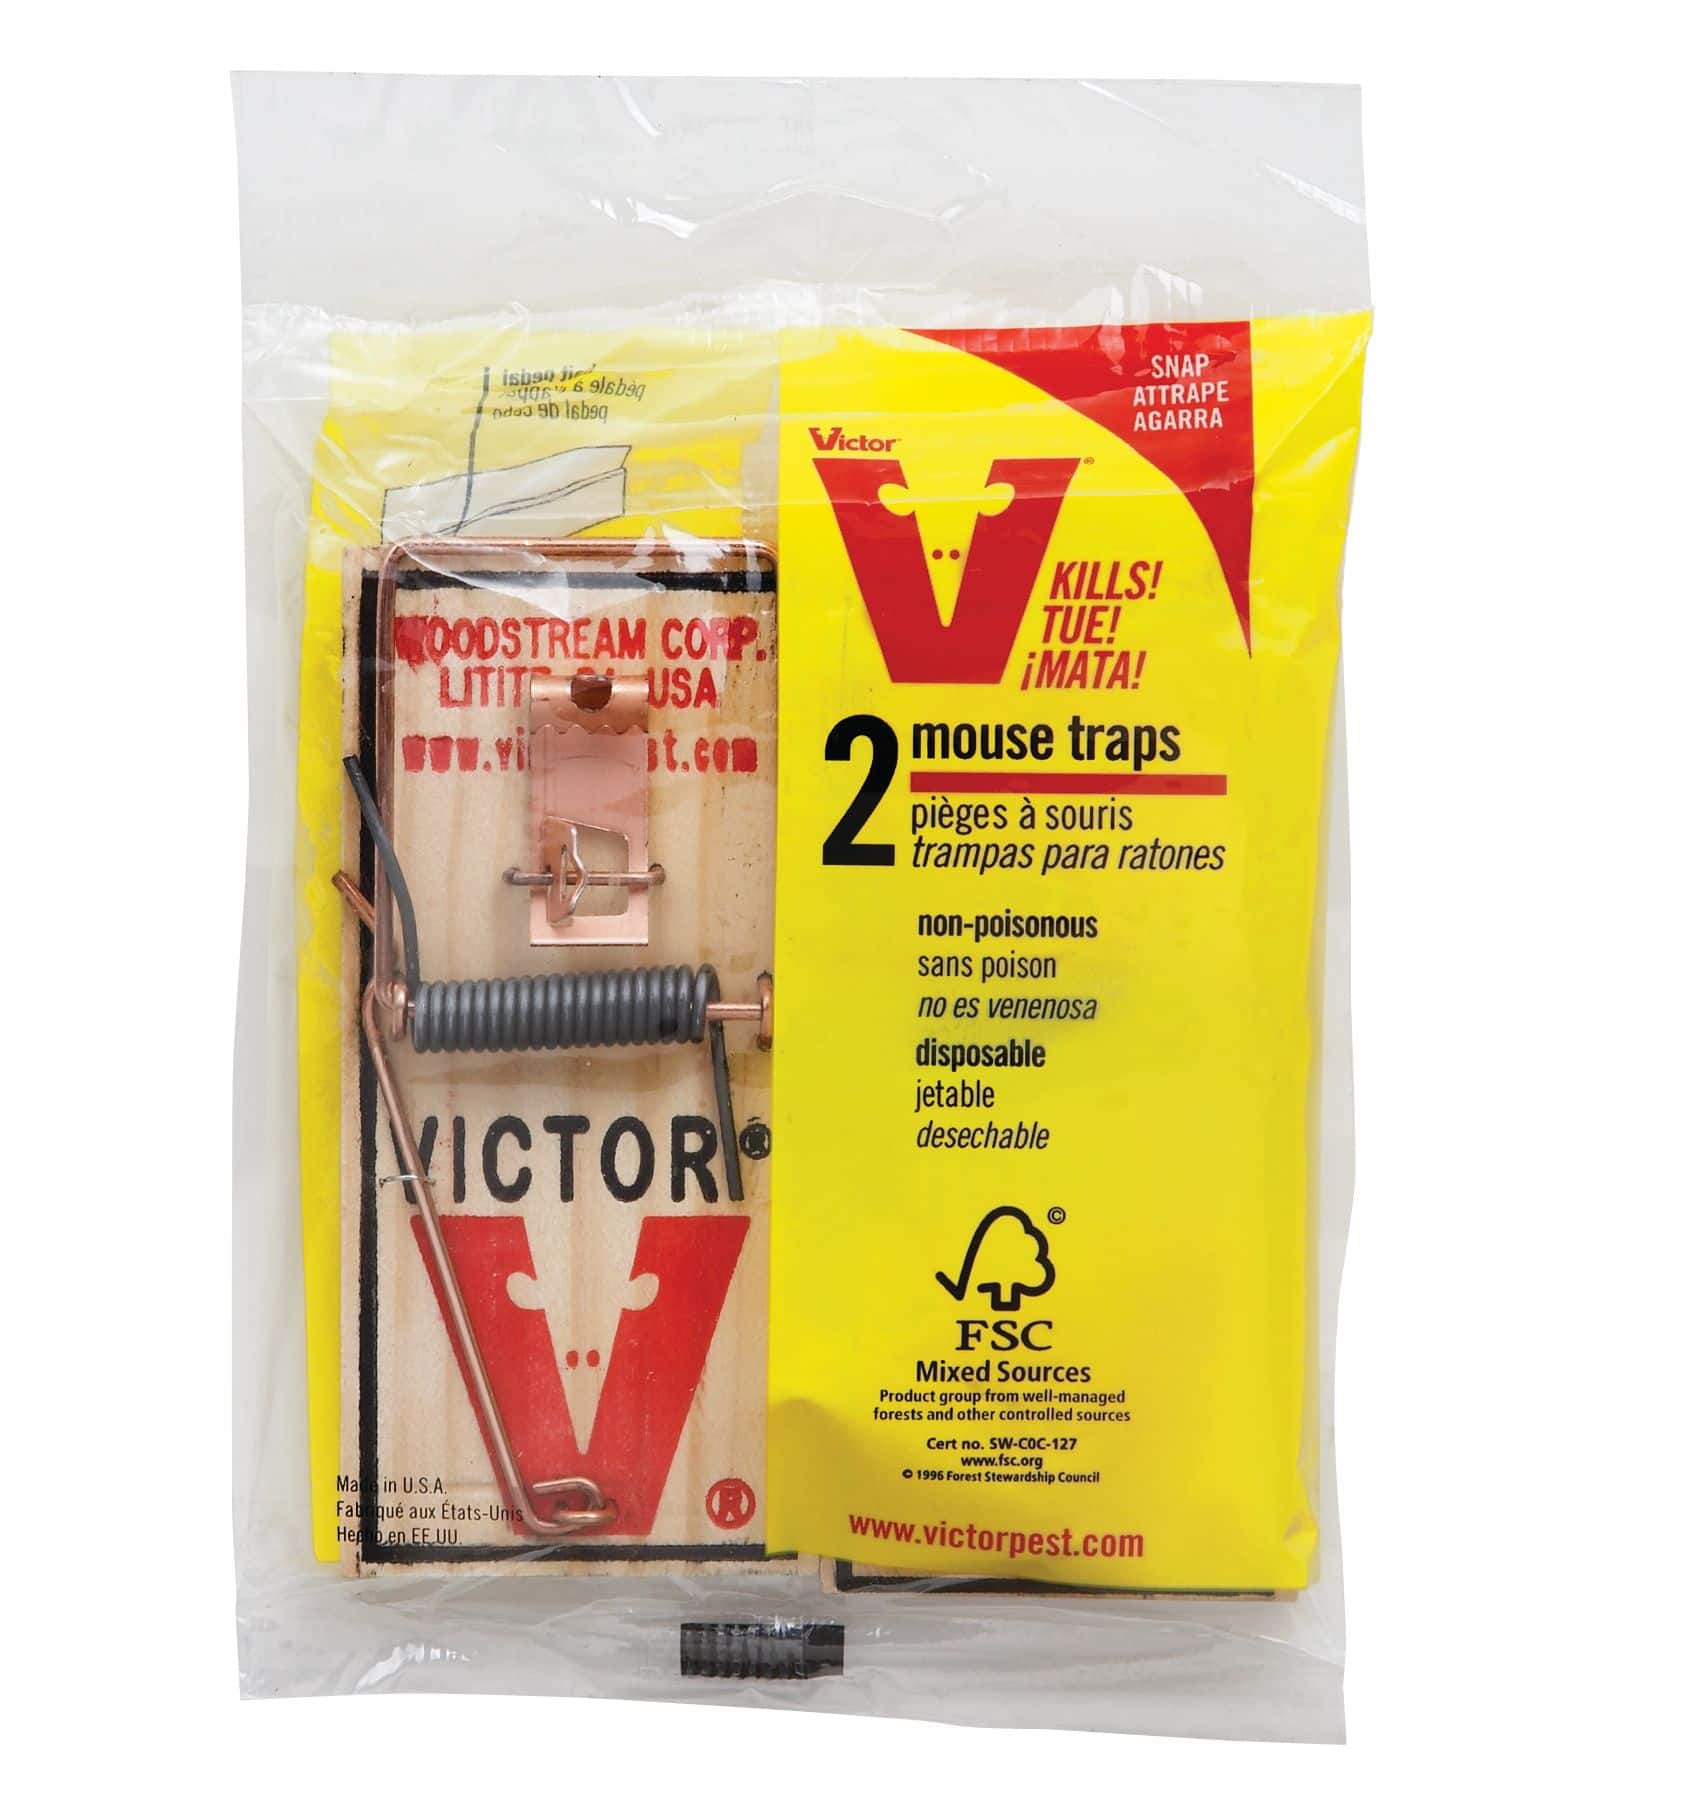 https://media-www.canadiantire.ca/product/seasonal-gardening/gardening/weed-insect-rodent-control/0593608/victor-mouse-traps-2pk-15200cc9-eecd-4e85-a5af-47cbd3c43633-jpgrendition.jpg